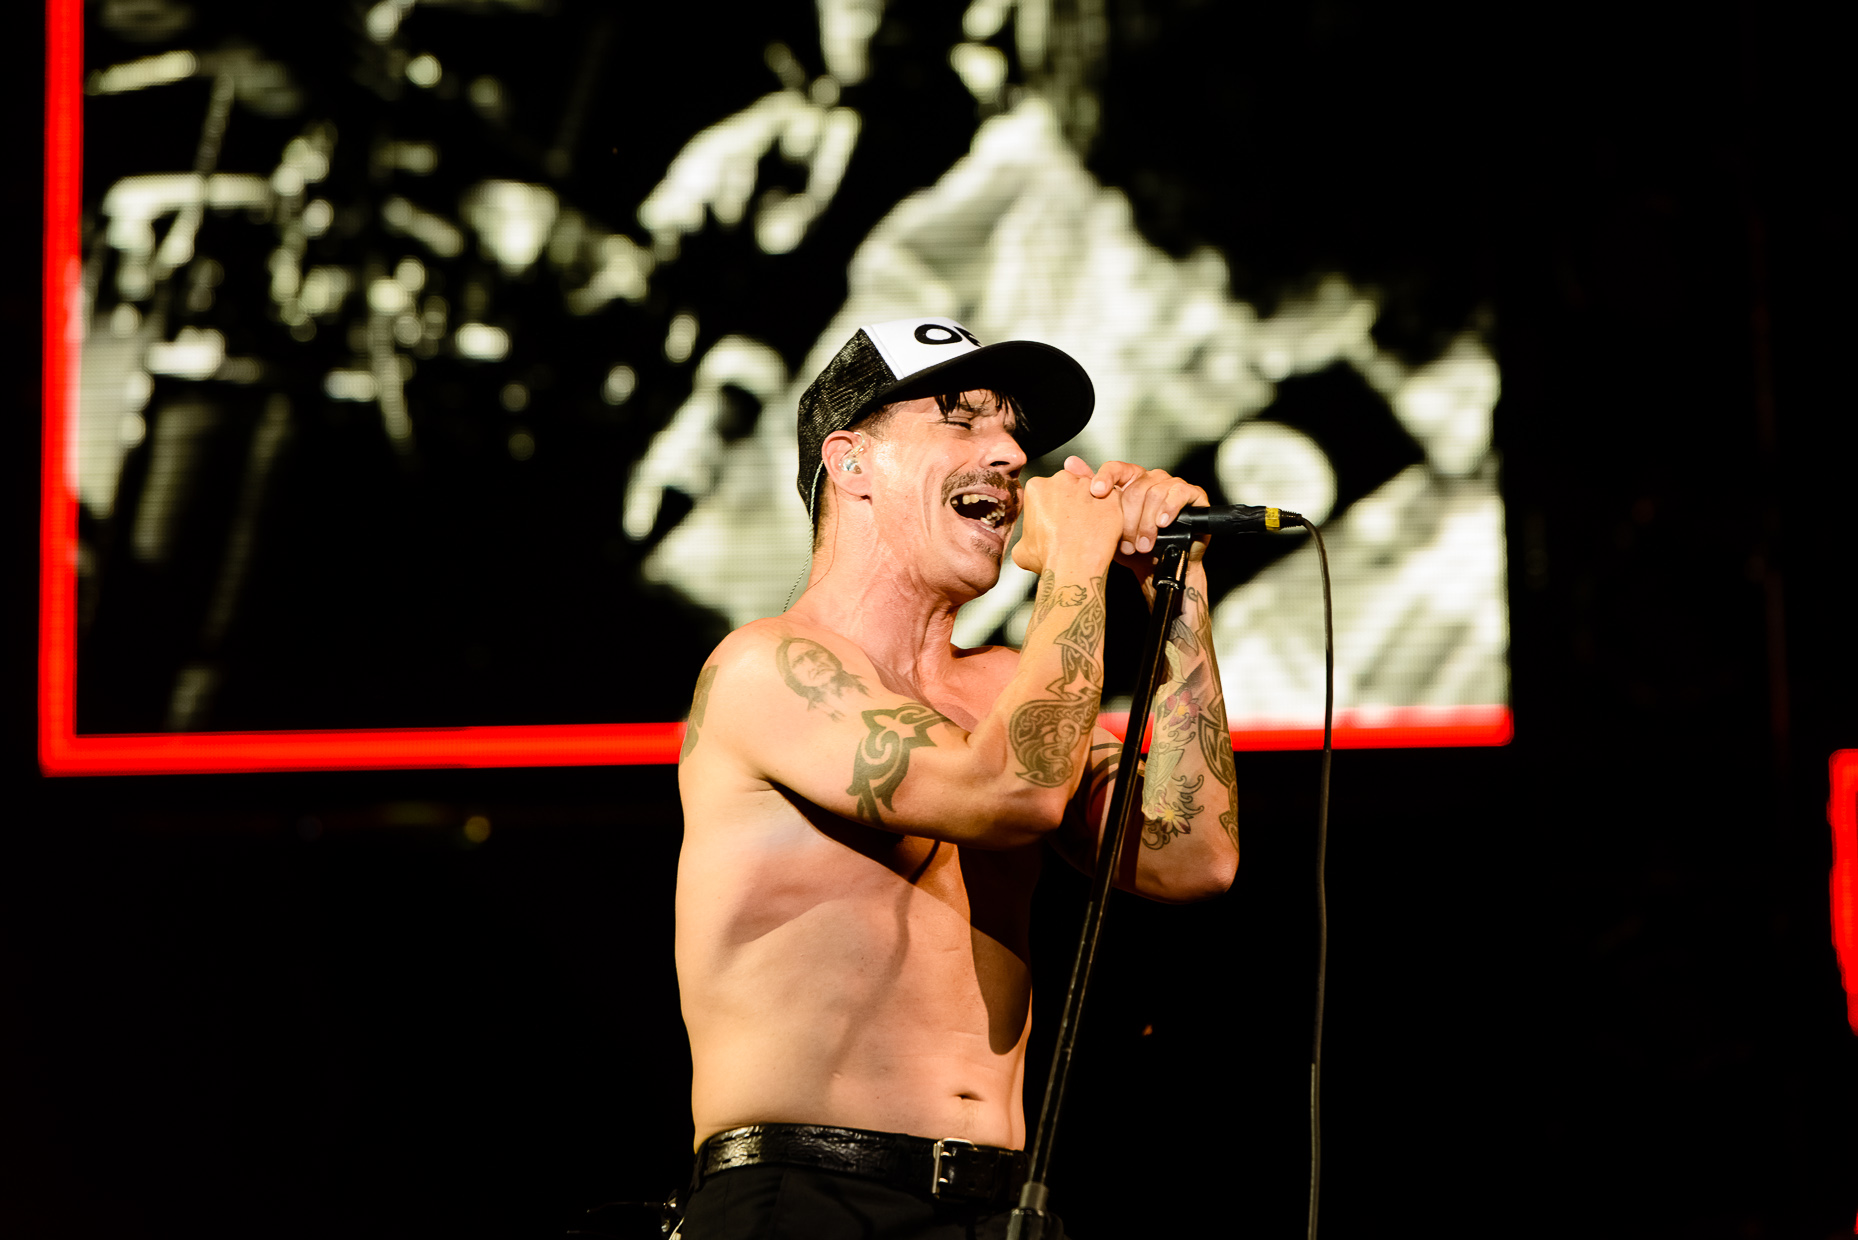 Red-Hot-Chili-Peppers-Anthony-Austin-Music-Commercial-Photography-Live.jpg